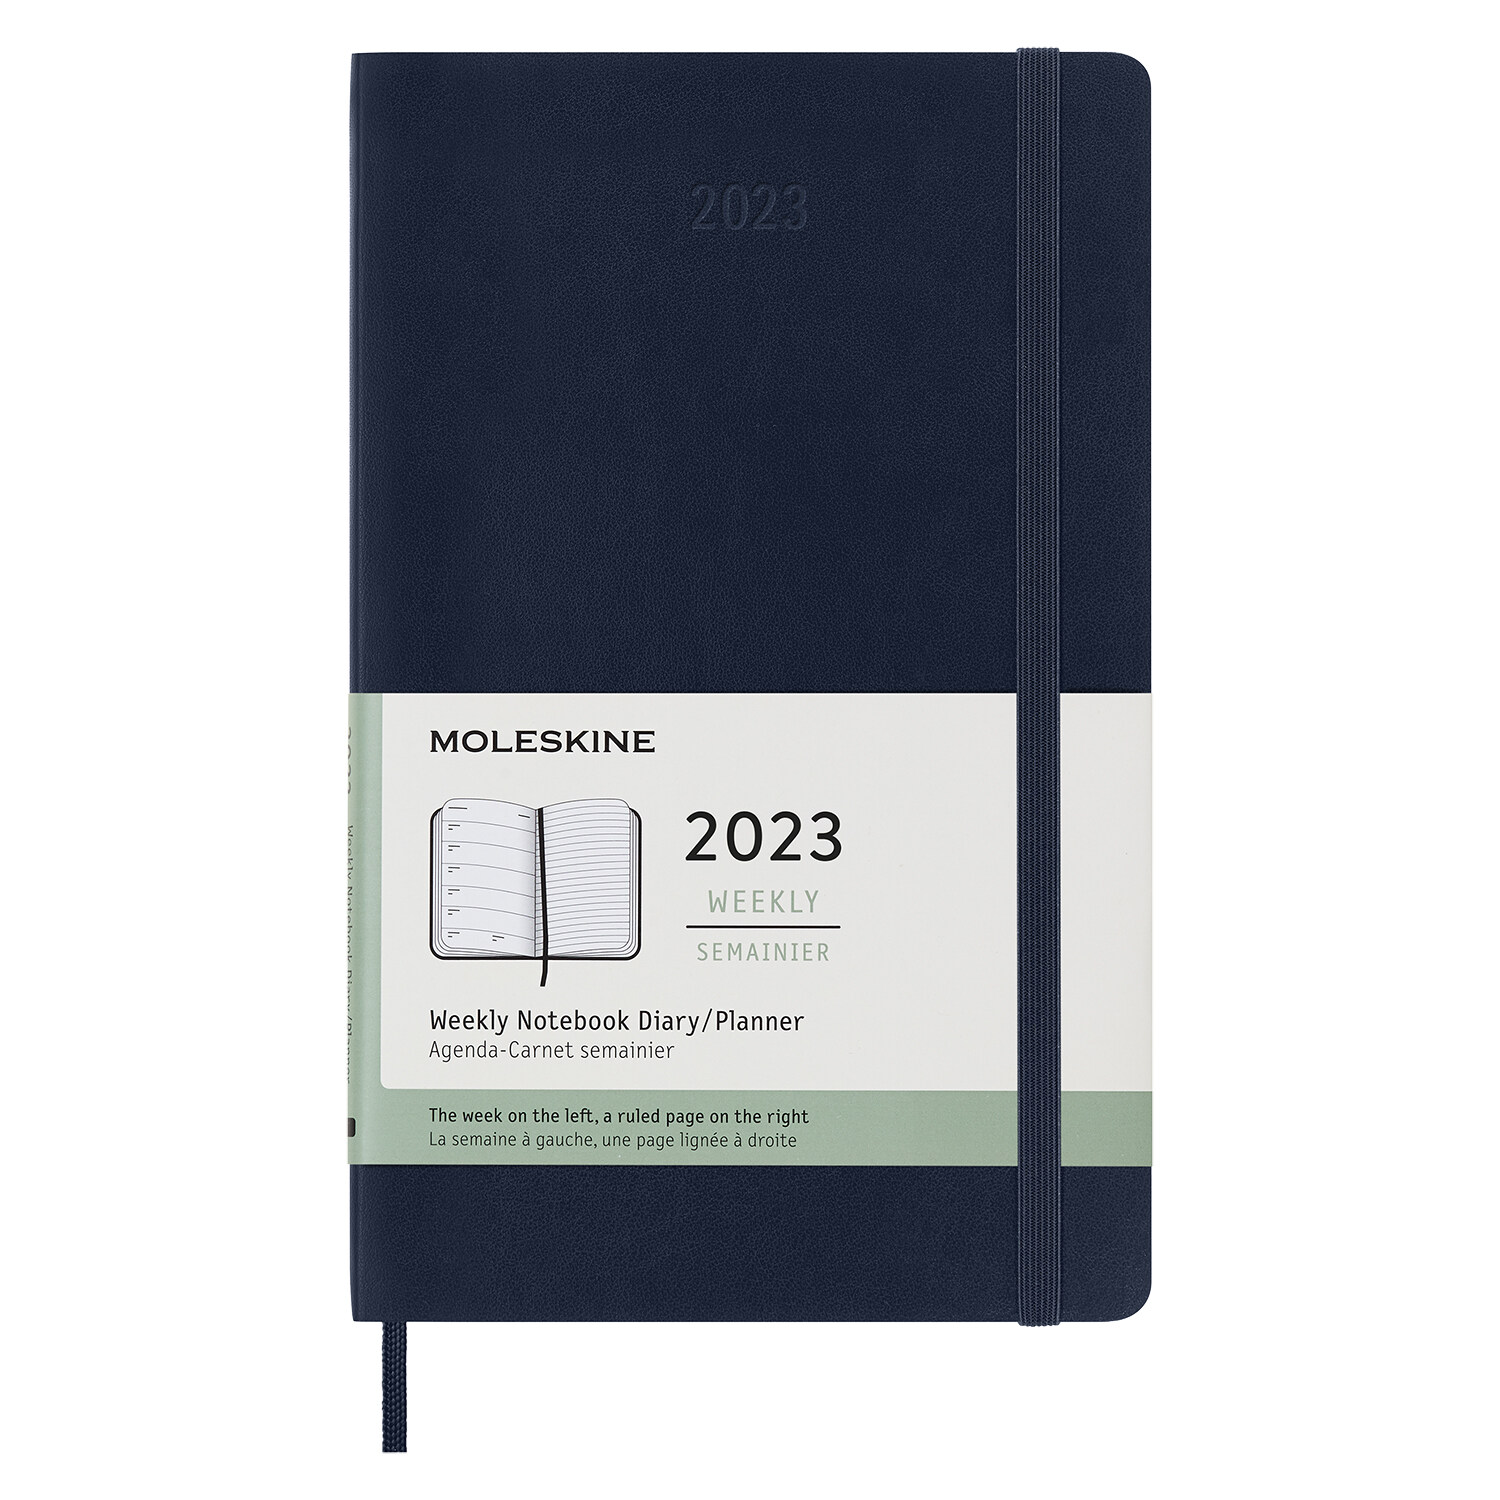 Moleskine 2023 Weekly Notebook Planner, 12m, Large, Saphire Blue, Soft Cover (5 X 8.25) (Other)